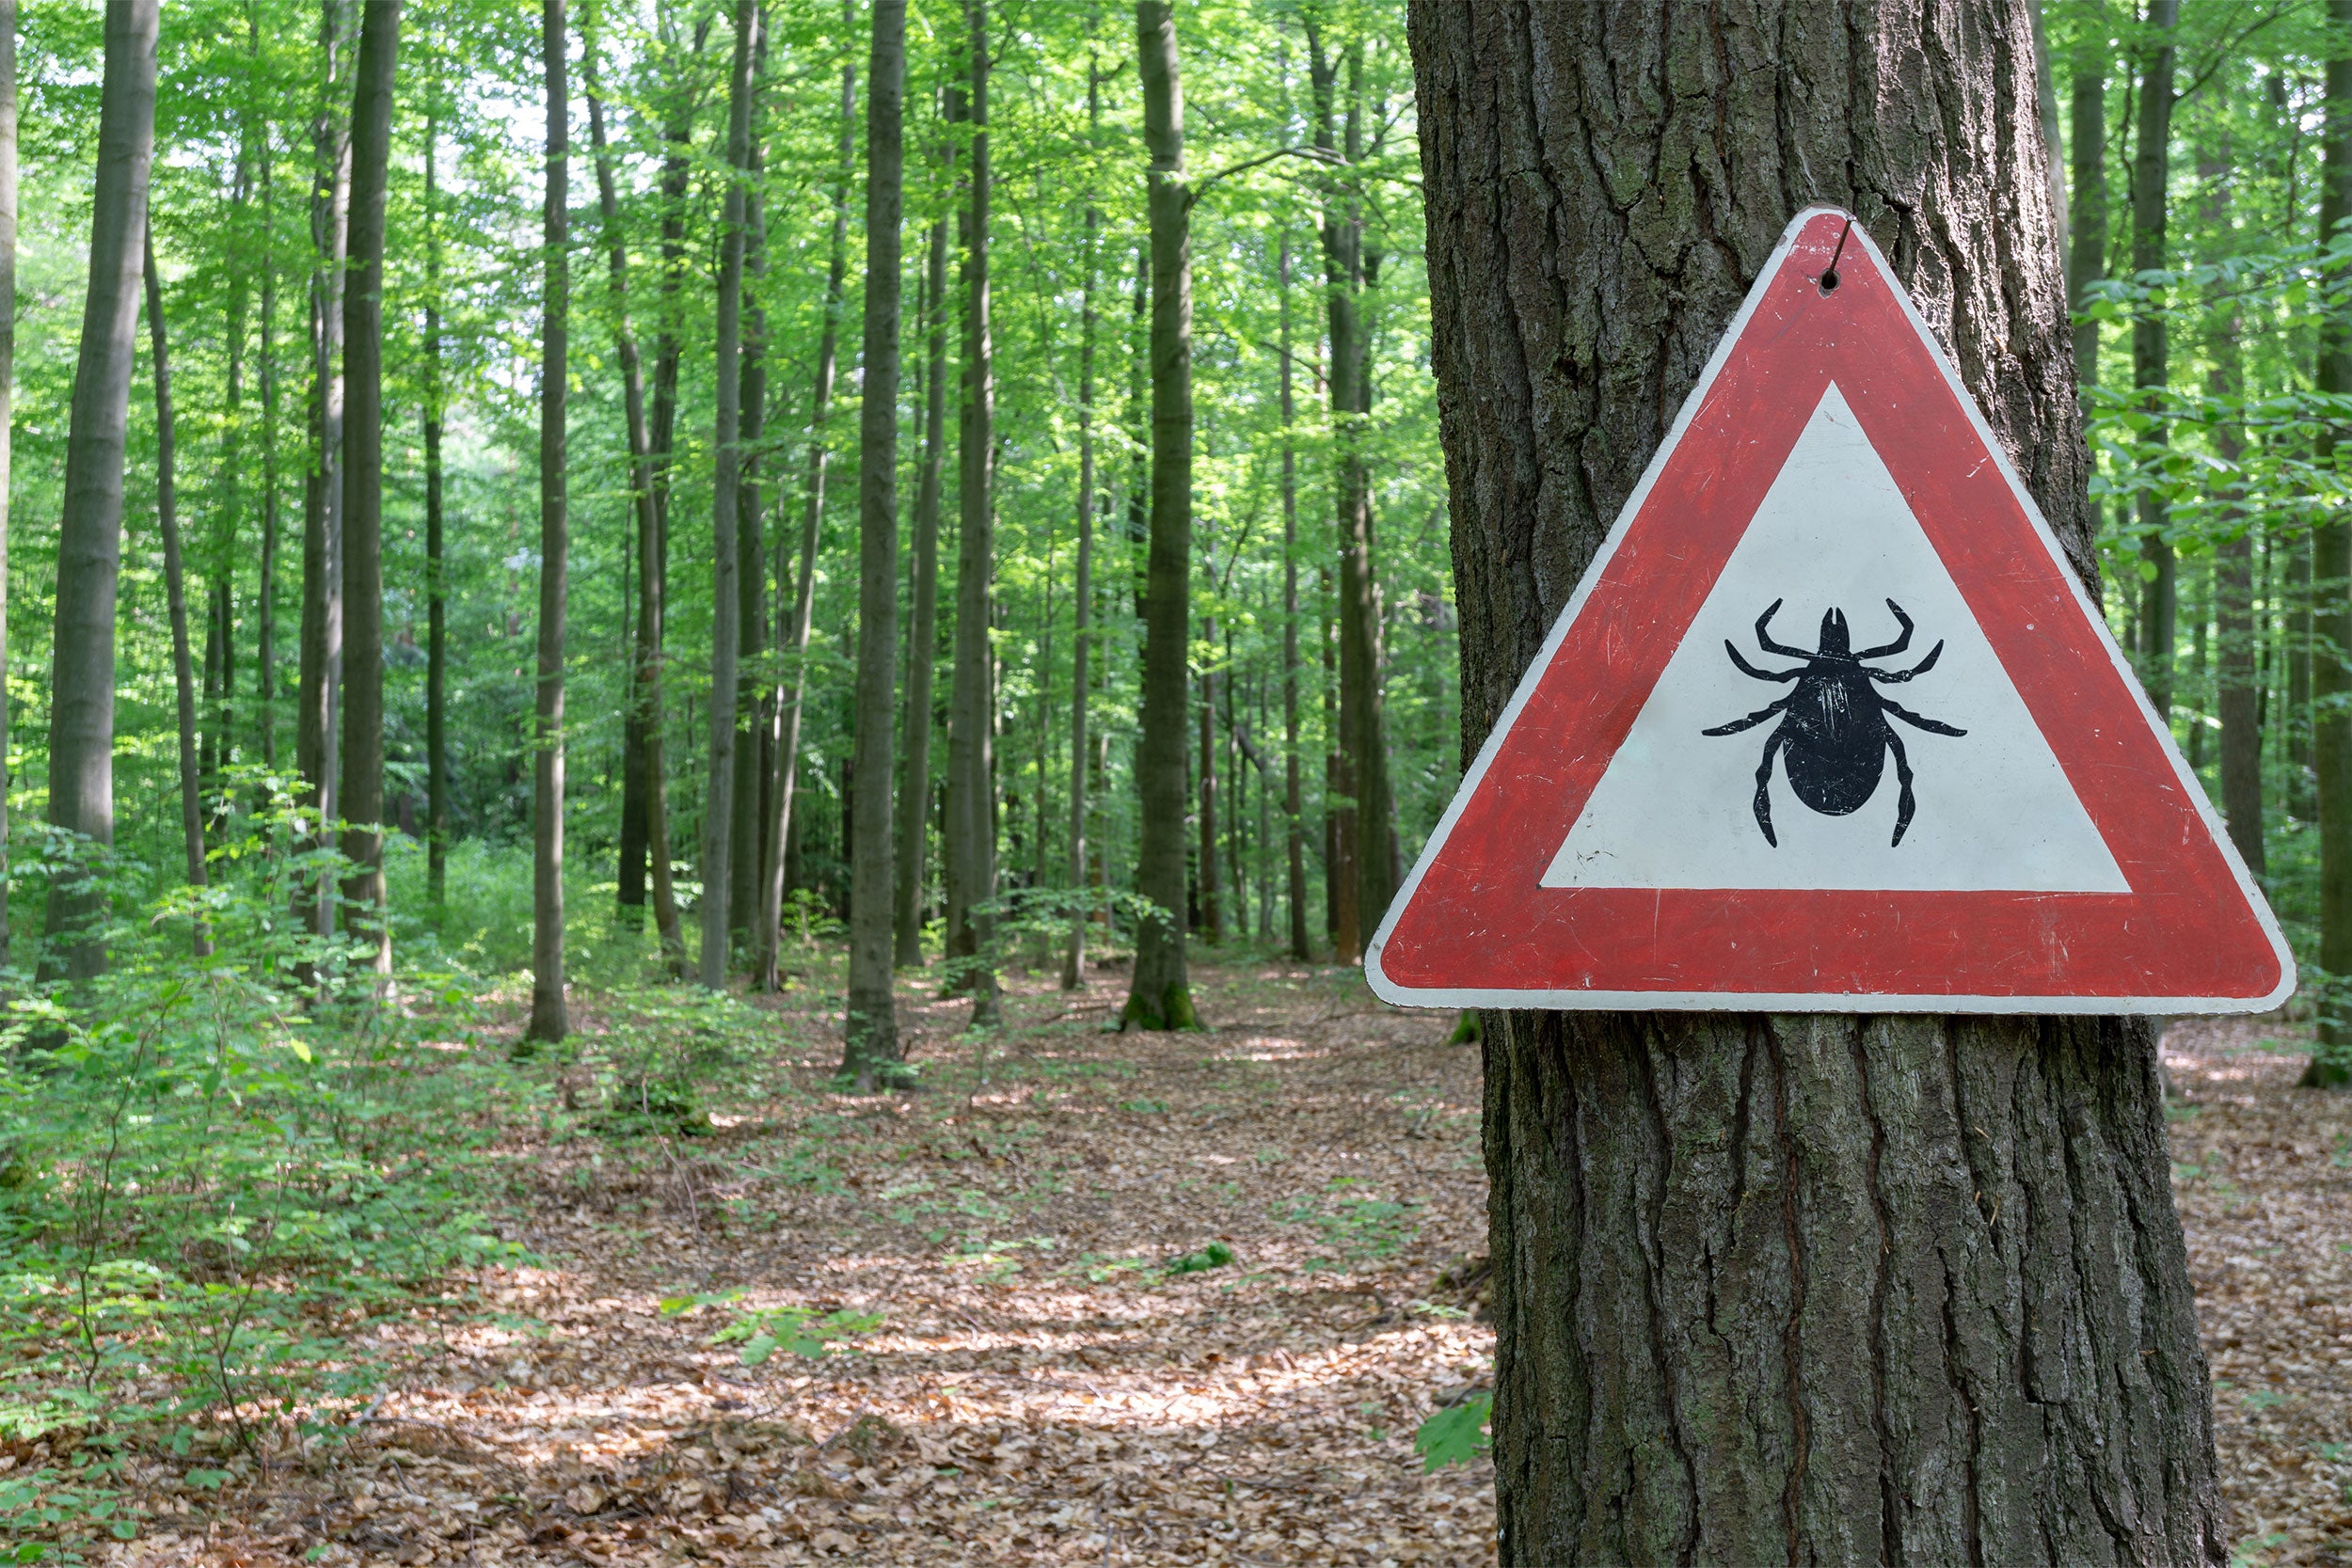 Tick warning sign in woods.